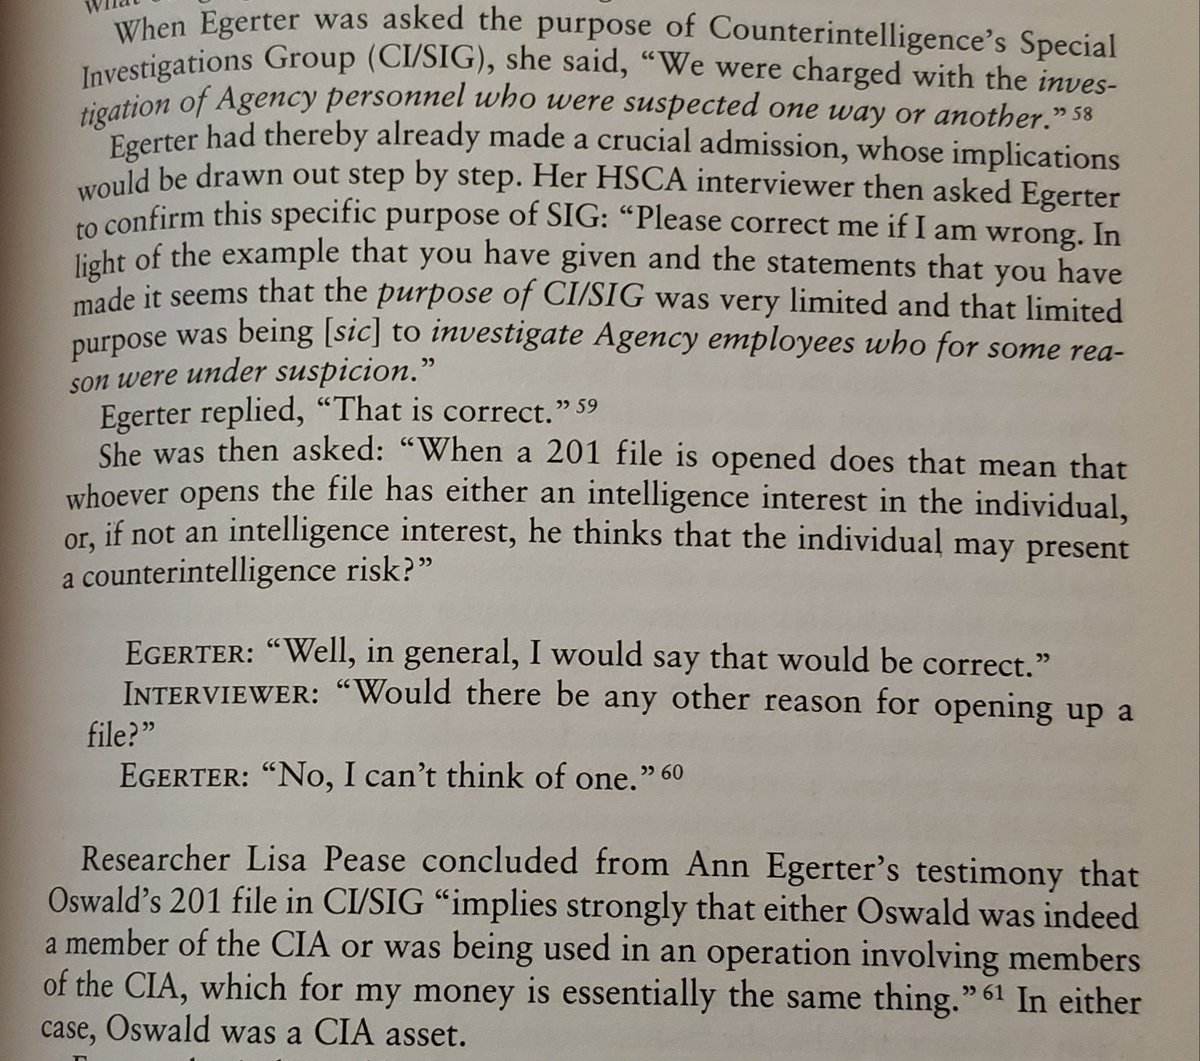 The real smoking gun re: Oswald was that he had a 201 file opened on him by the Counterintelligence Special Investigations group of the CIA - the only reason a person had this file opened on them is if they *were* a CIA asset determined to be a risk of defecting or going haywire: